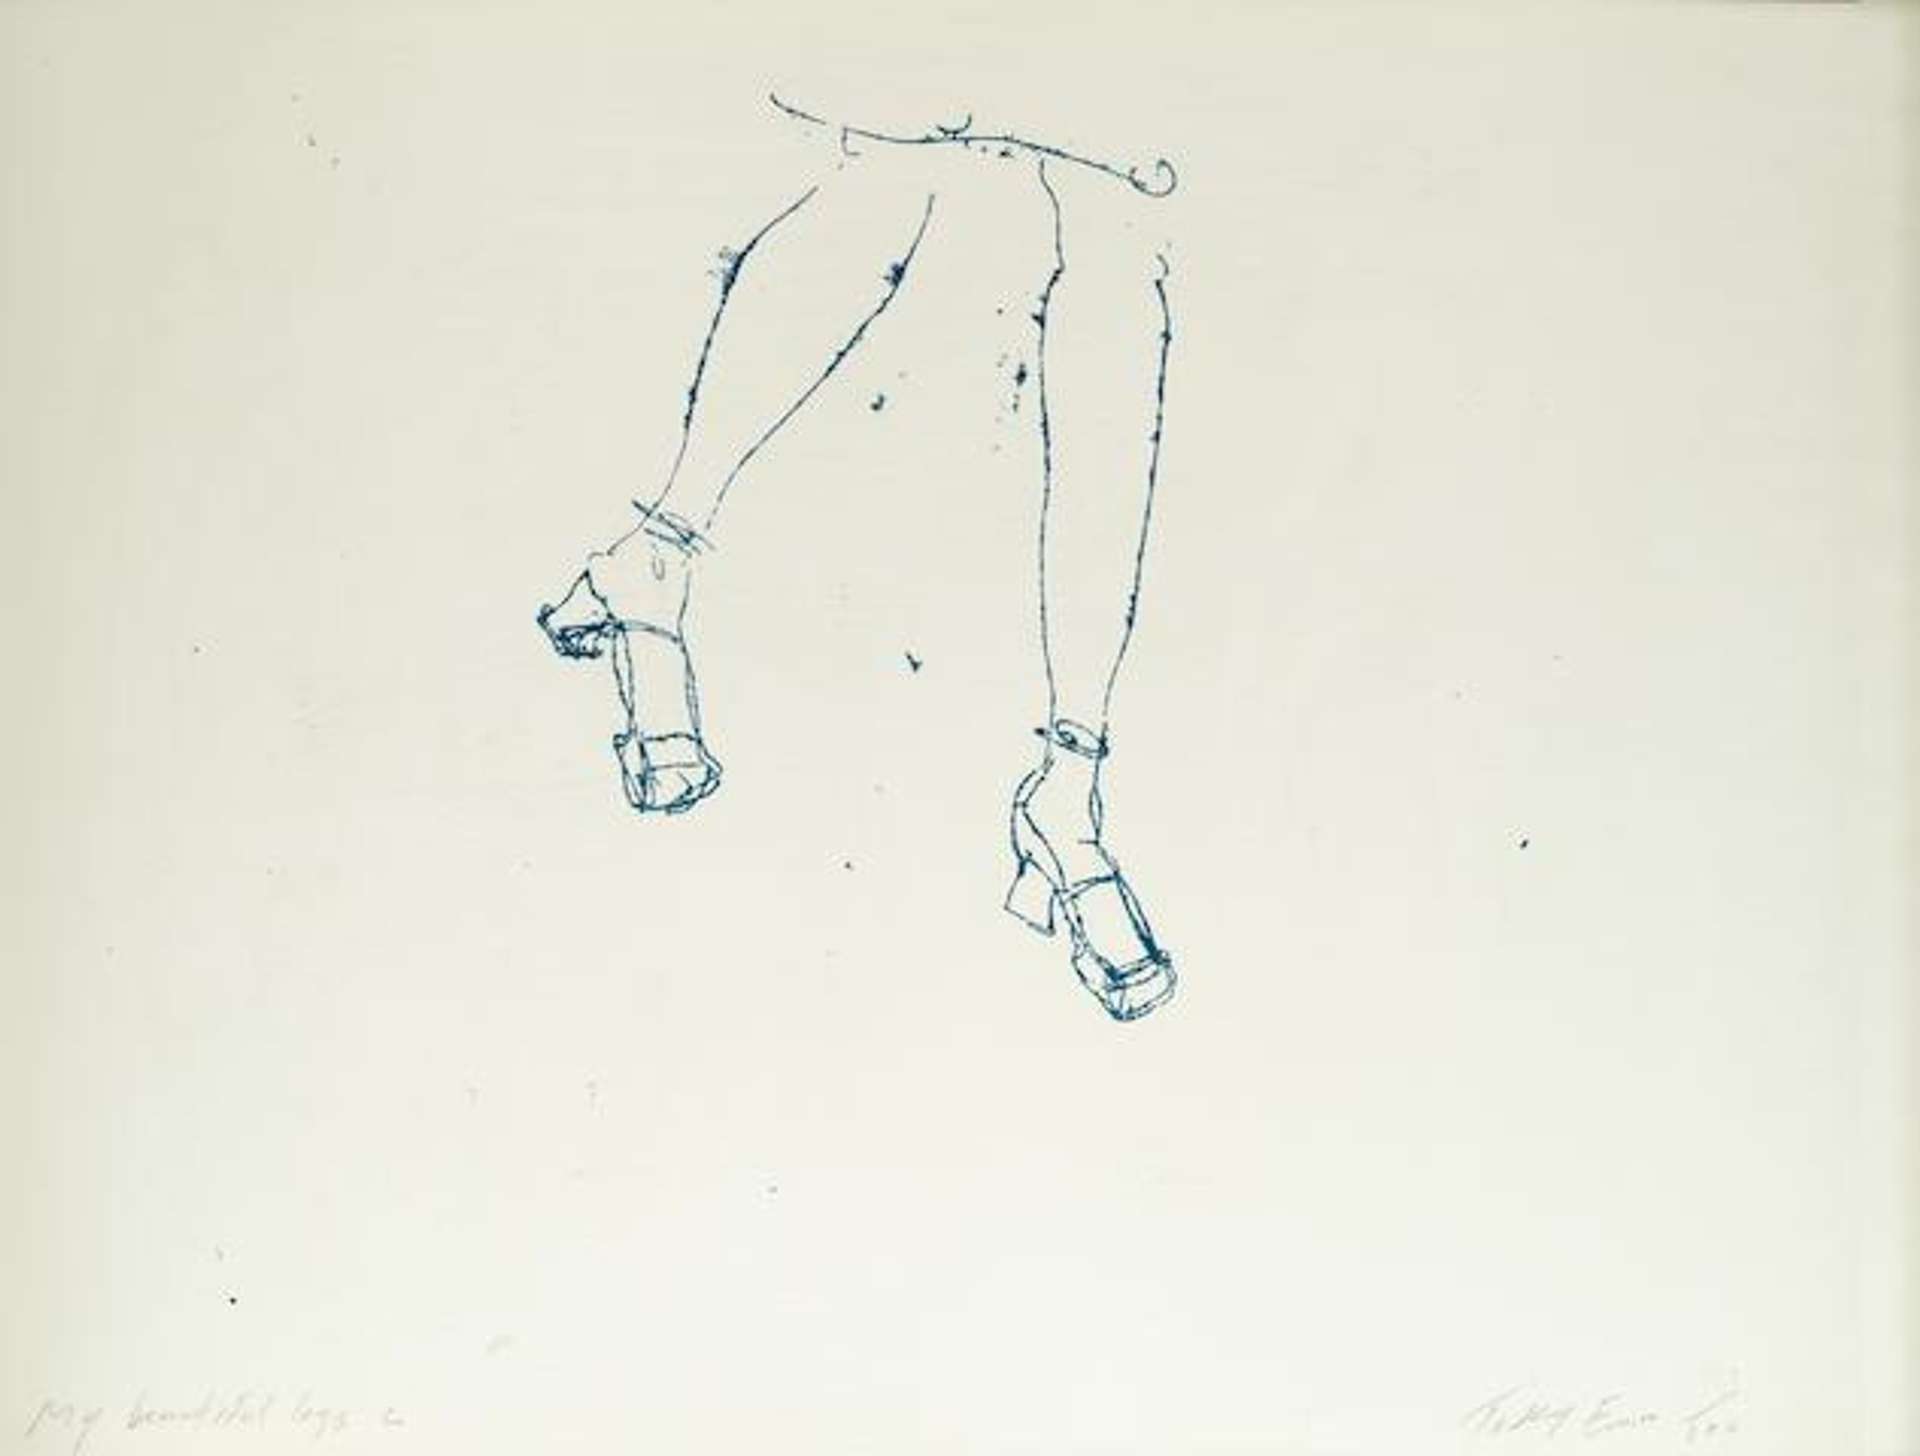 This print by Tracey Emin shows a pair of female legs wearing high-heeled shoes. The thin lines are sketched out in navy blue against a cream background.